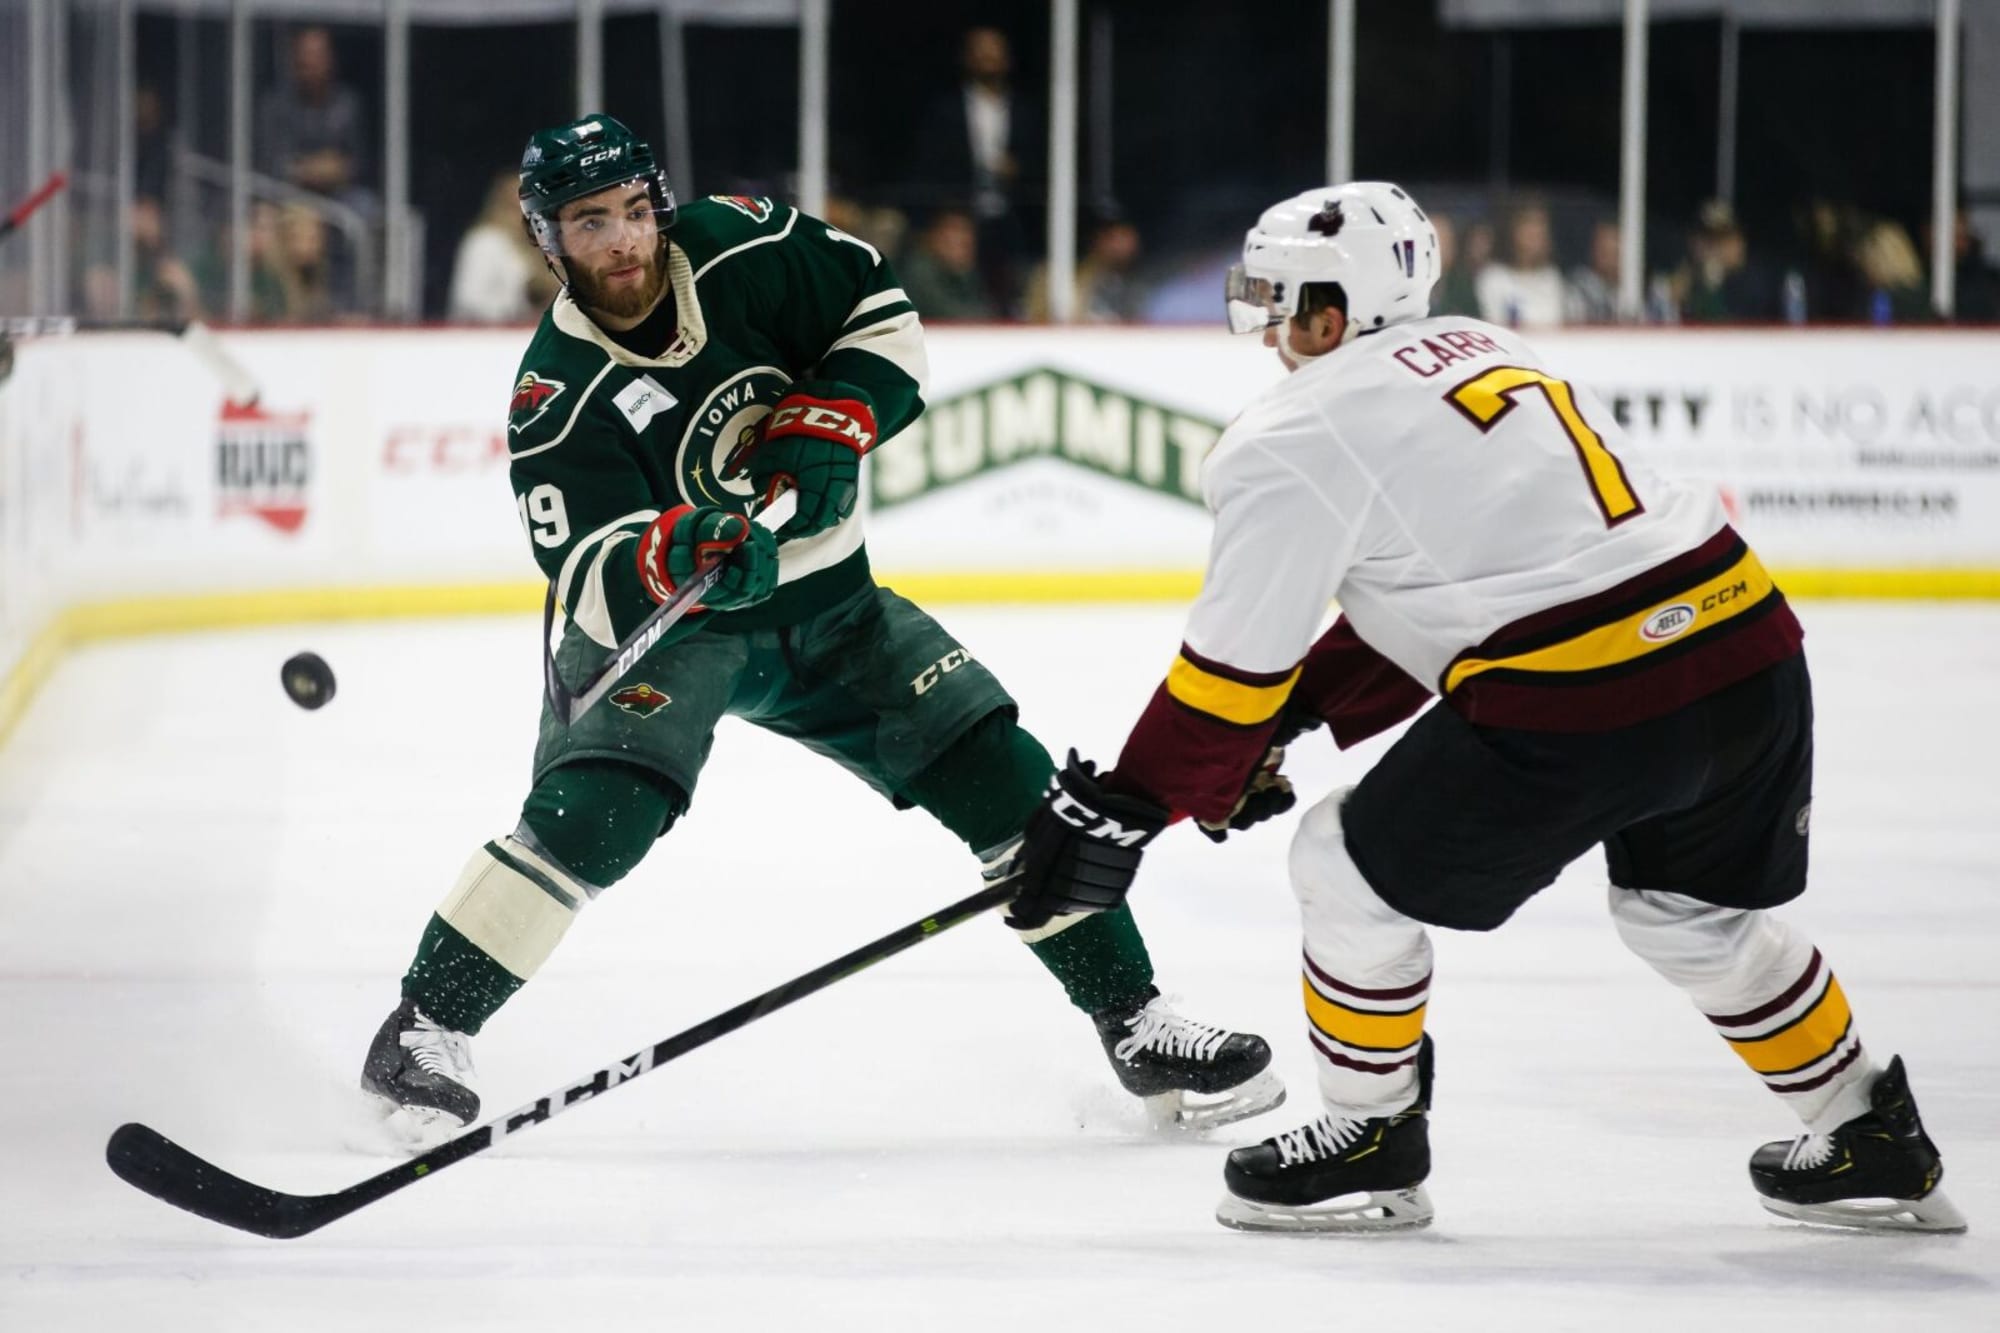 The Iowa Wild take on the Chicago Wolves in the Calder Cup playoffs